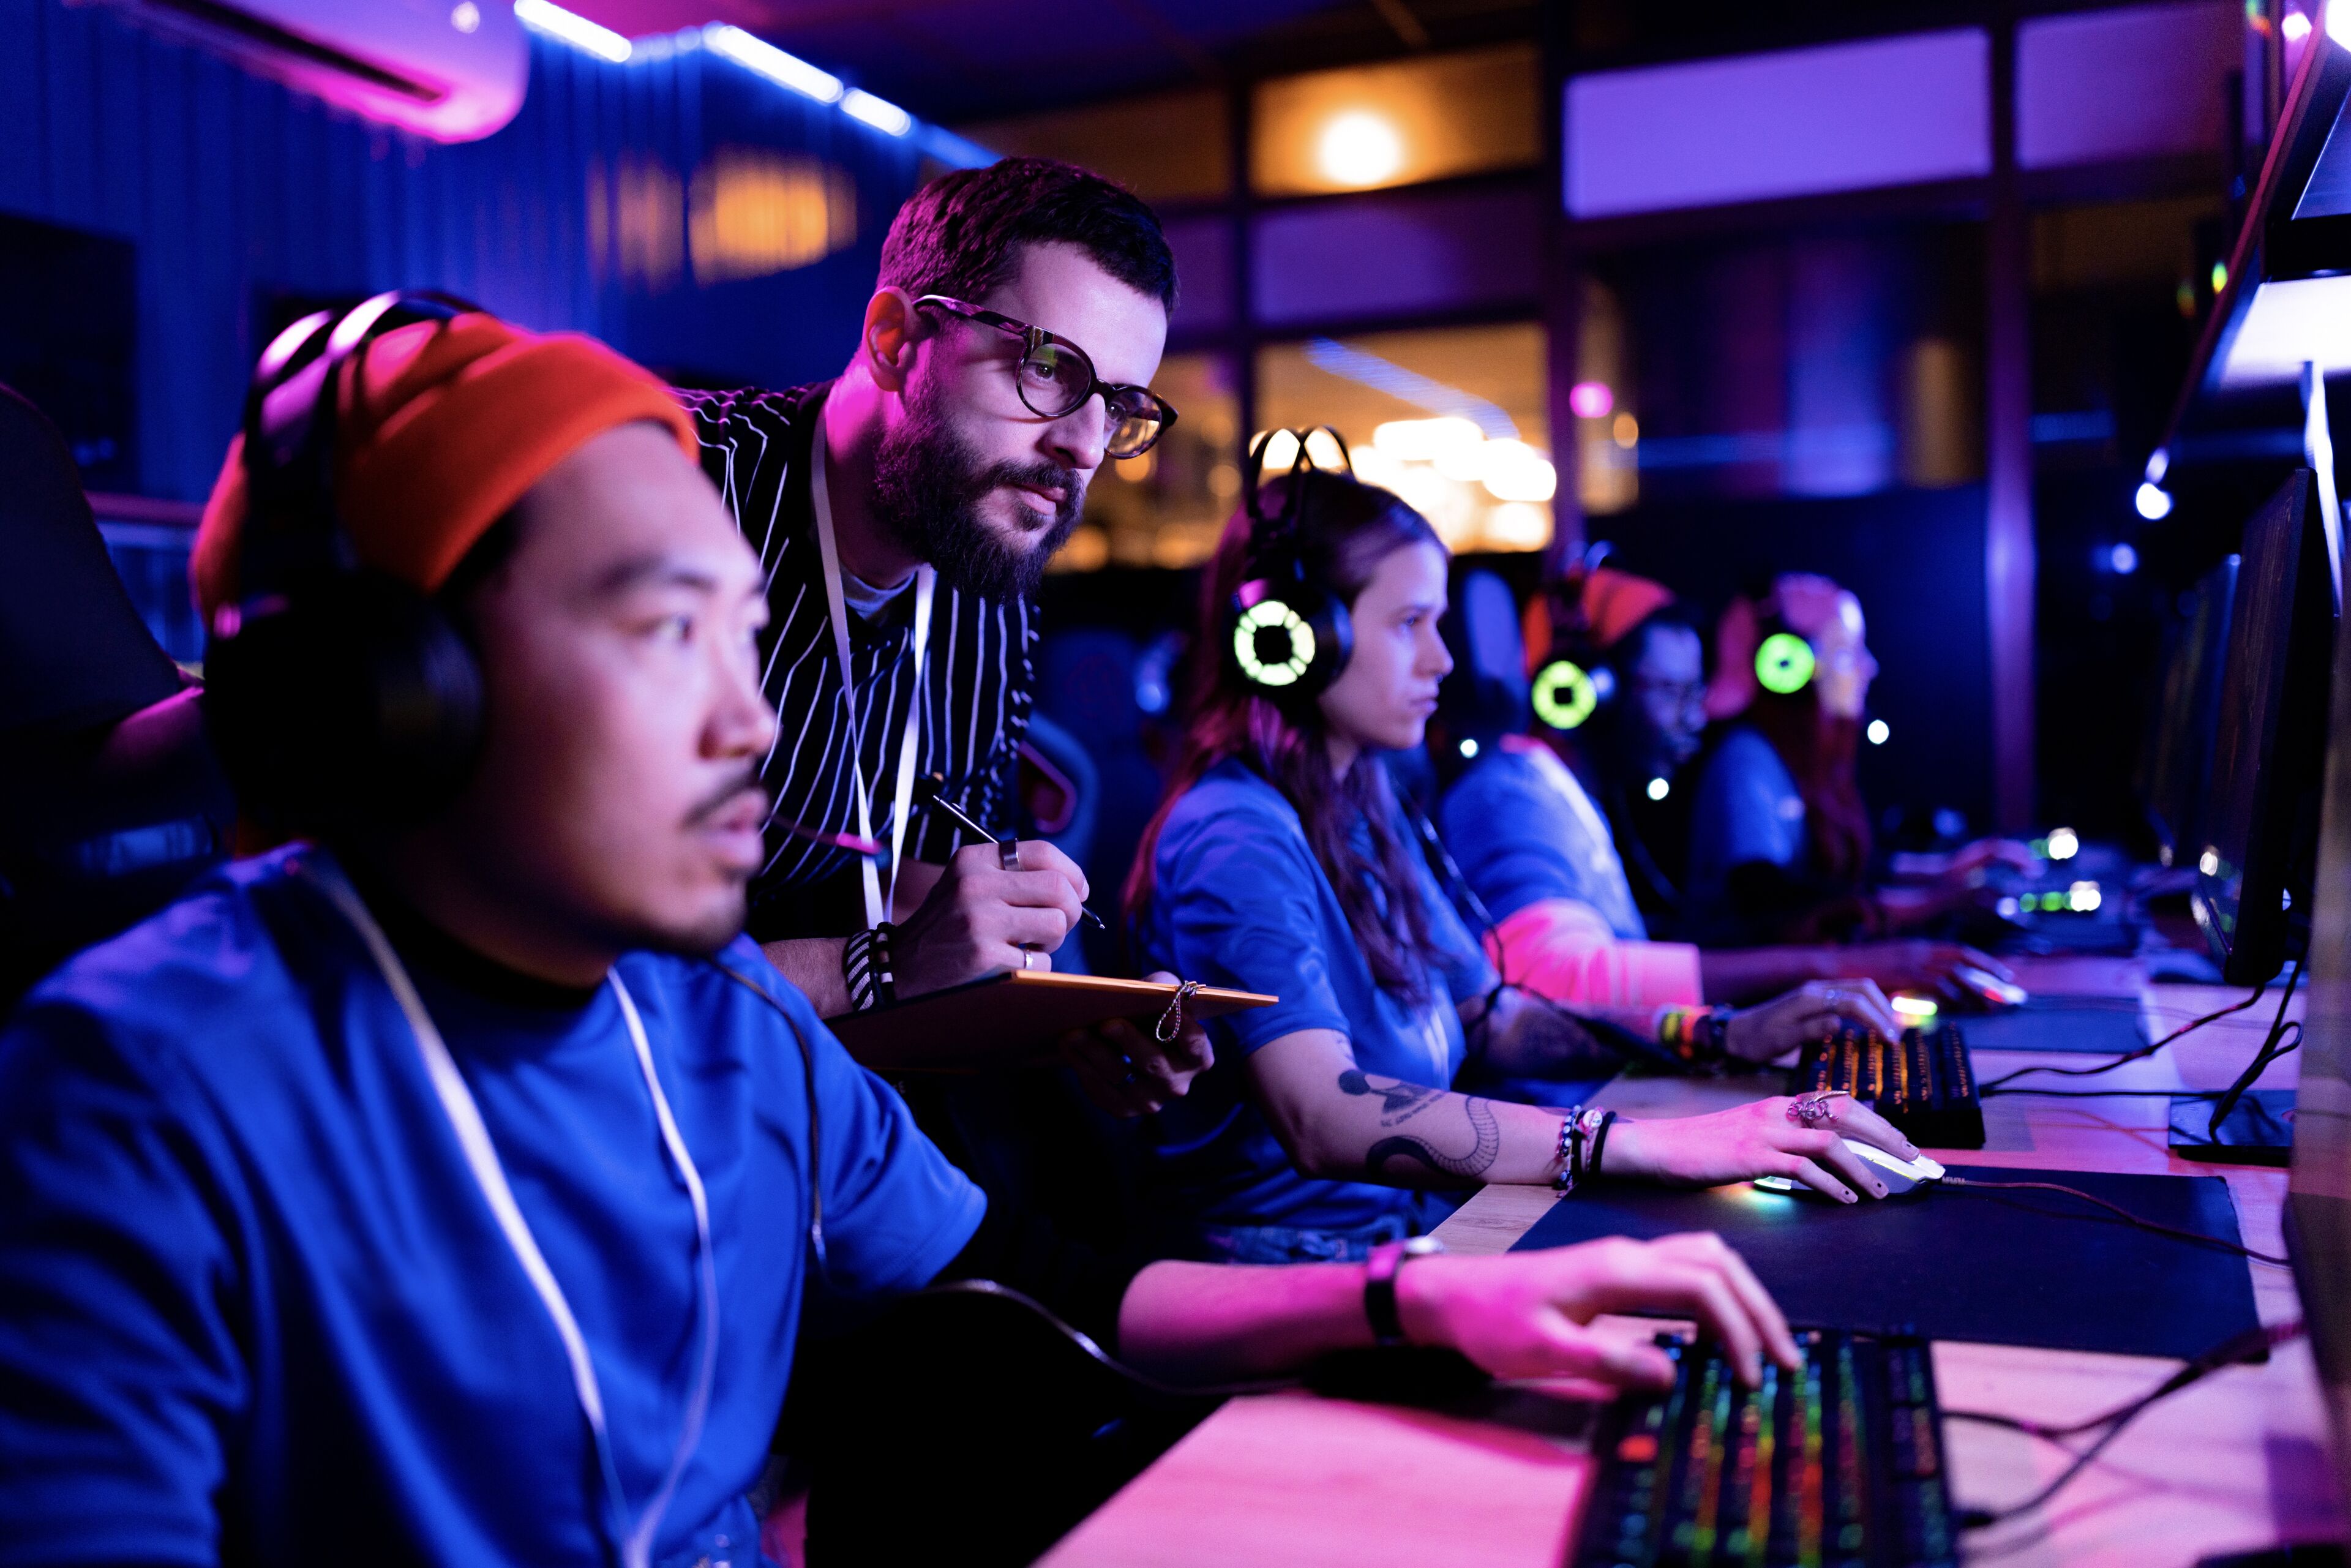 A focused group of gamers participating in a competitive gaming tournament, equipped with headphones and backlit keyboards.